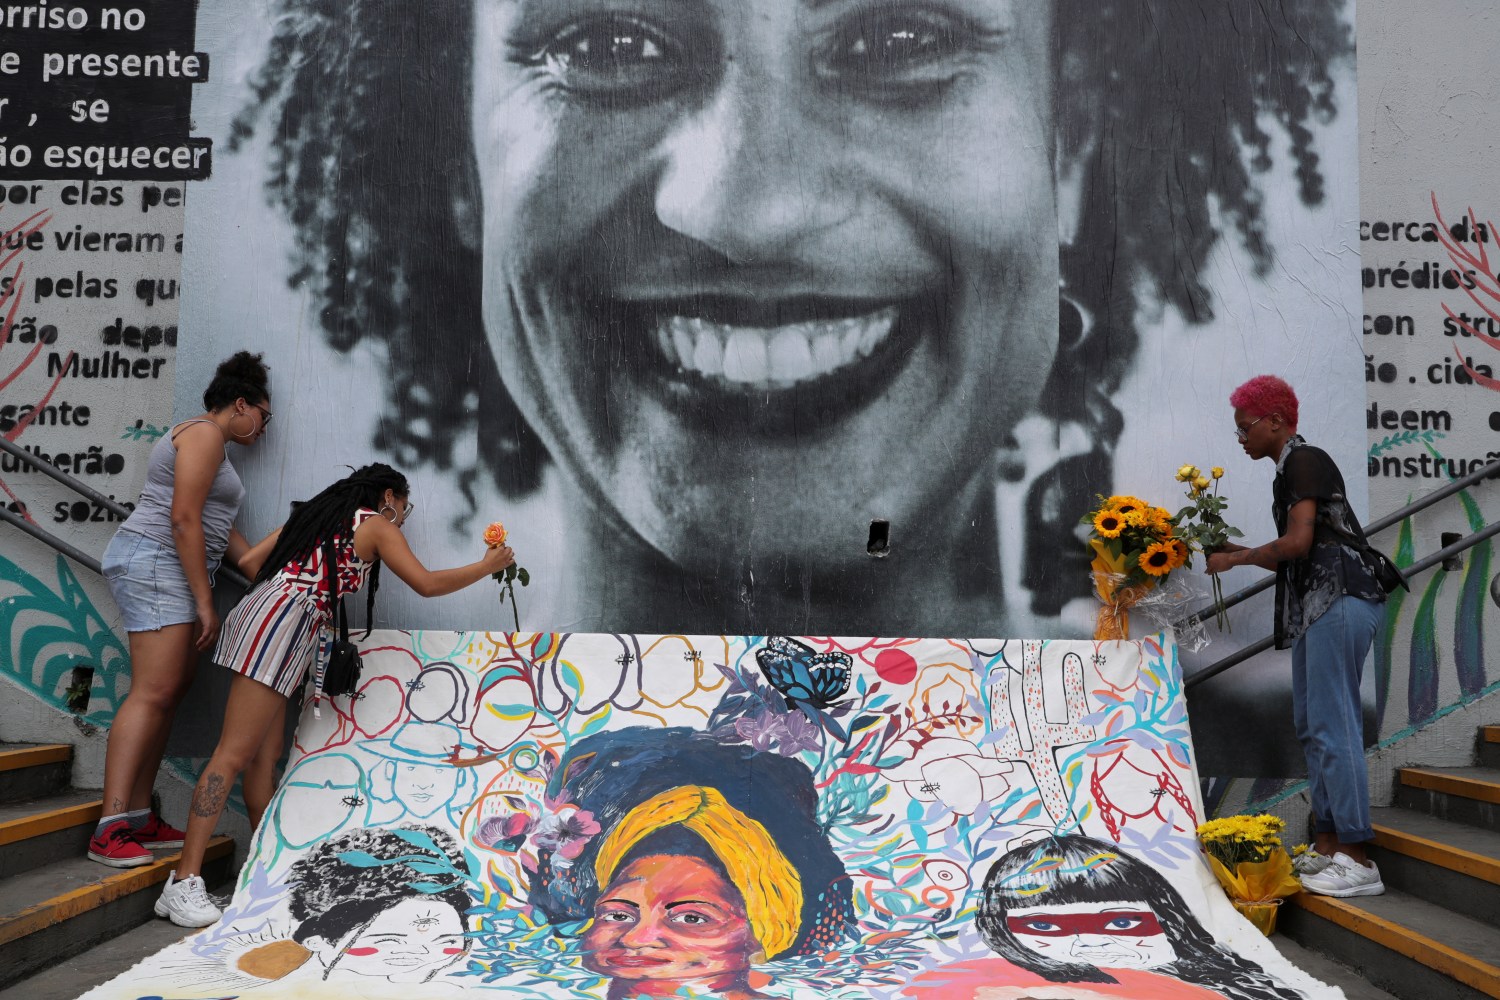 Women lay flowers at a mural of the murdered human rights activist Marielle Franco.